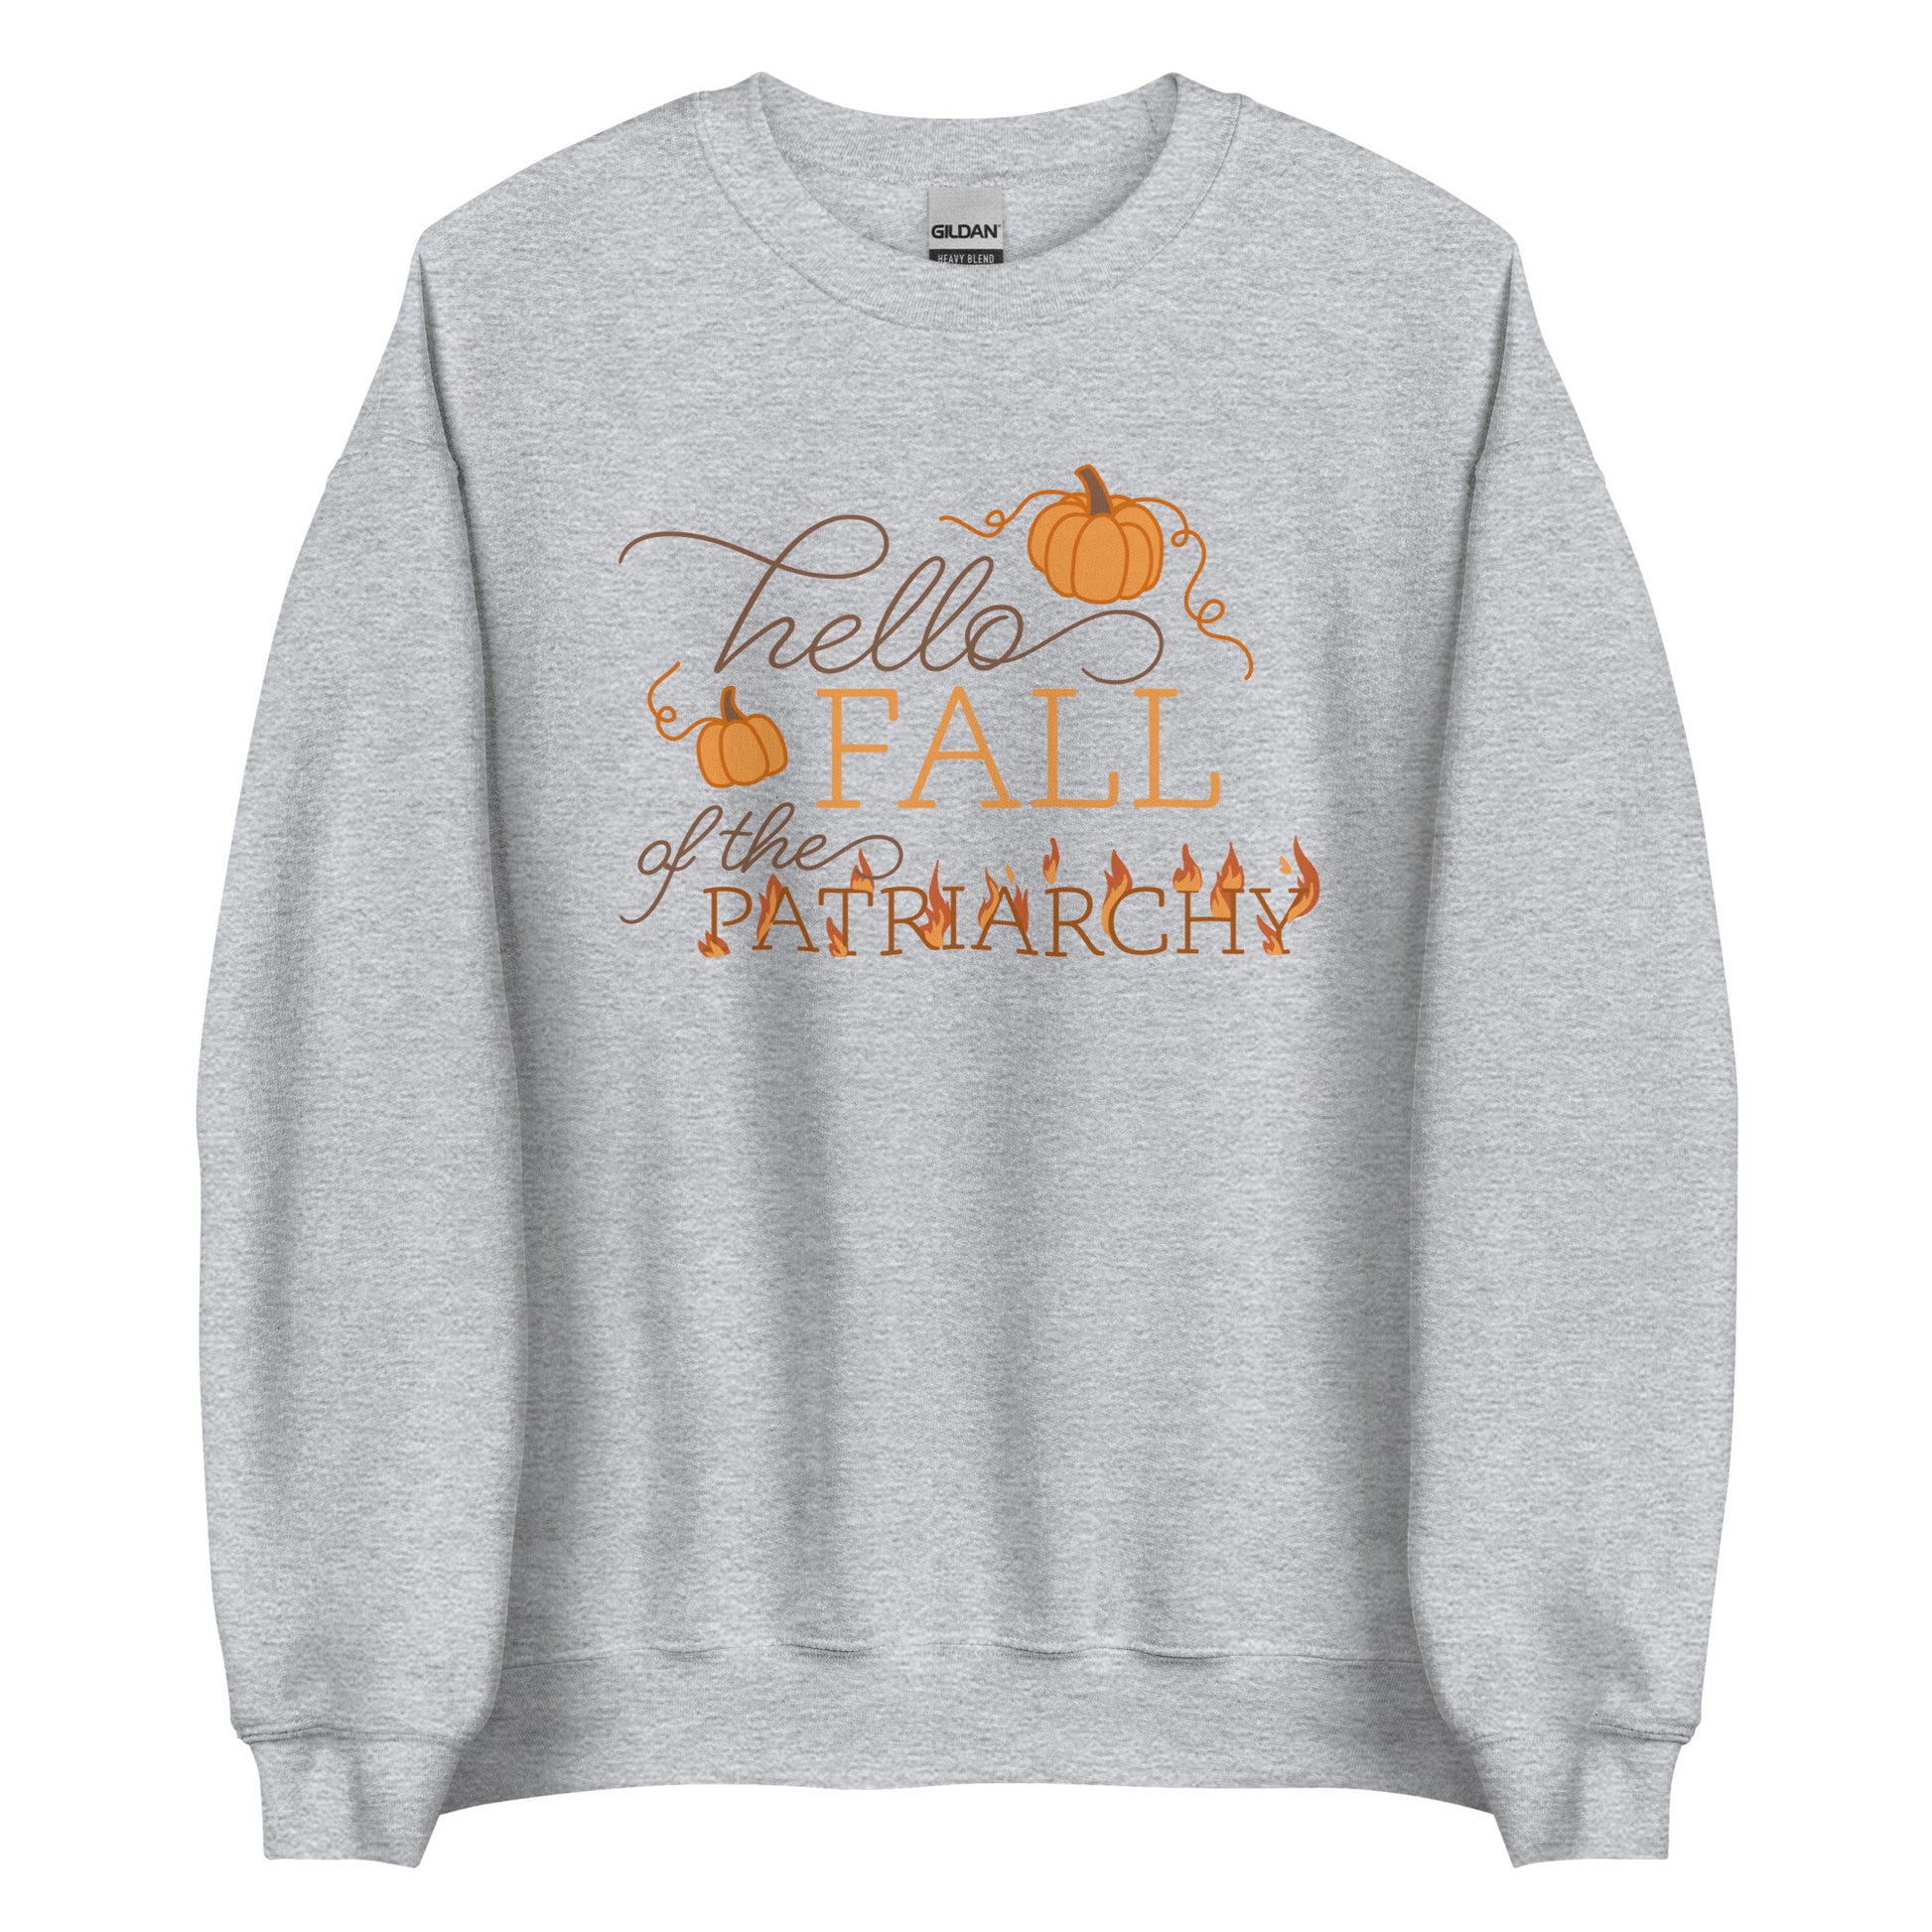 A heathered grey crewneck sweatshirt featuring text that reads "Hello fall of the patriarchy". Pumpkins surround the first half of the text and the word "patriarchy" is on fire.